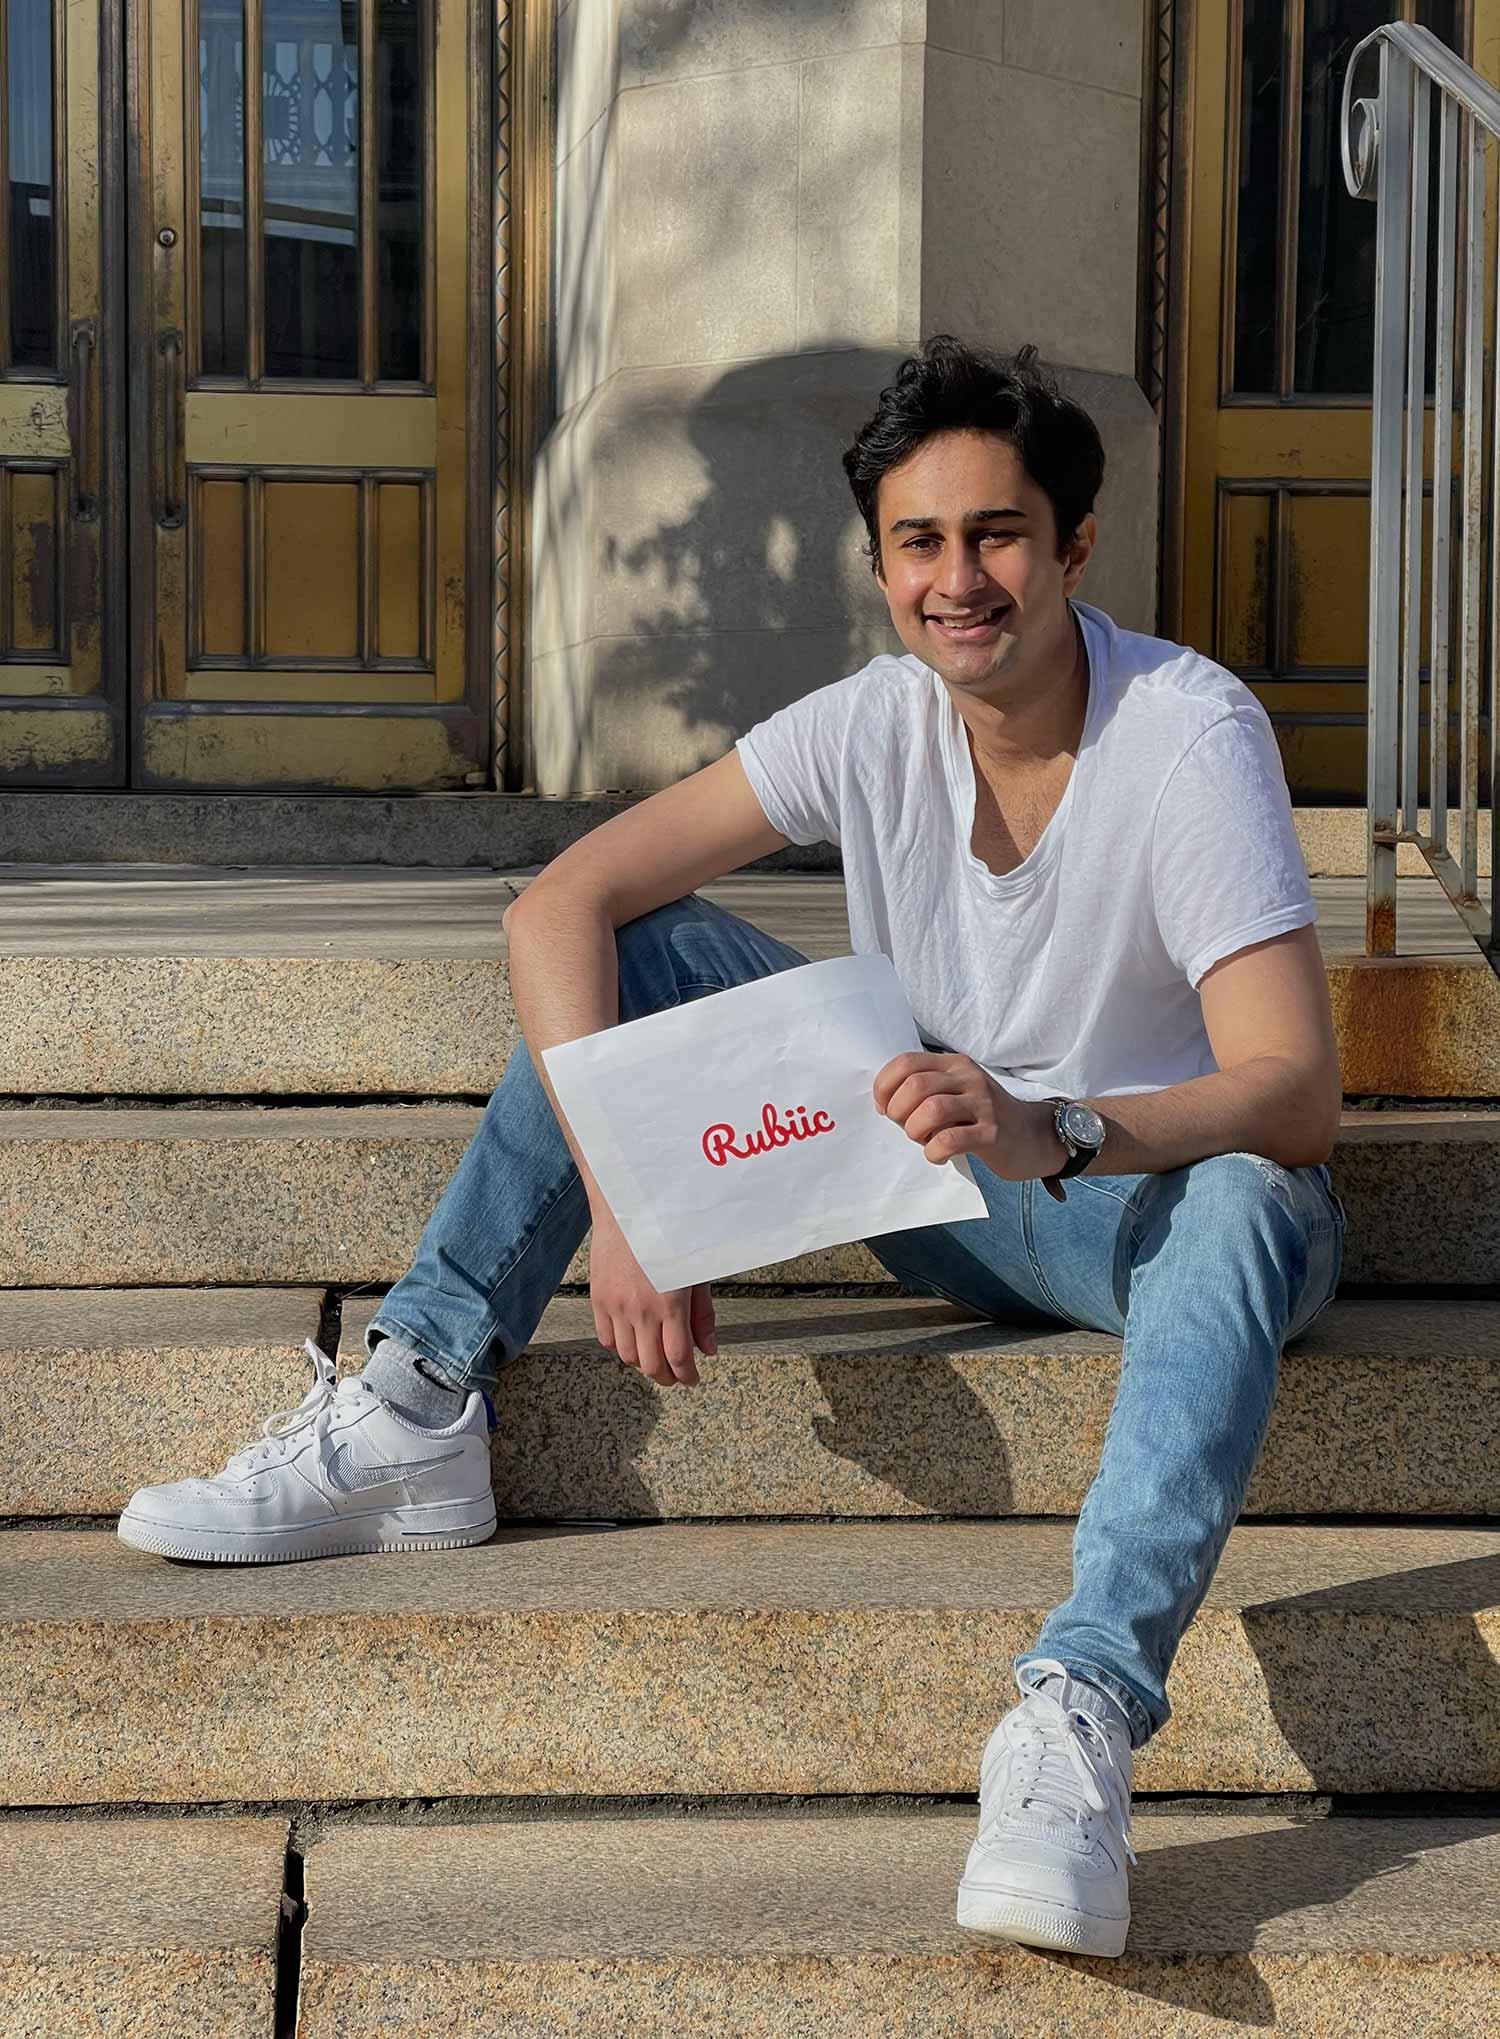 Photo of Asad Malik (MET’21) sitting on granite steps, with a white t-shirt, sneakers and jeans on, smiling and holding an envelope that says "Rubiic" in red cursive font.